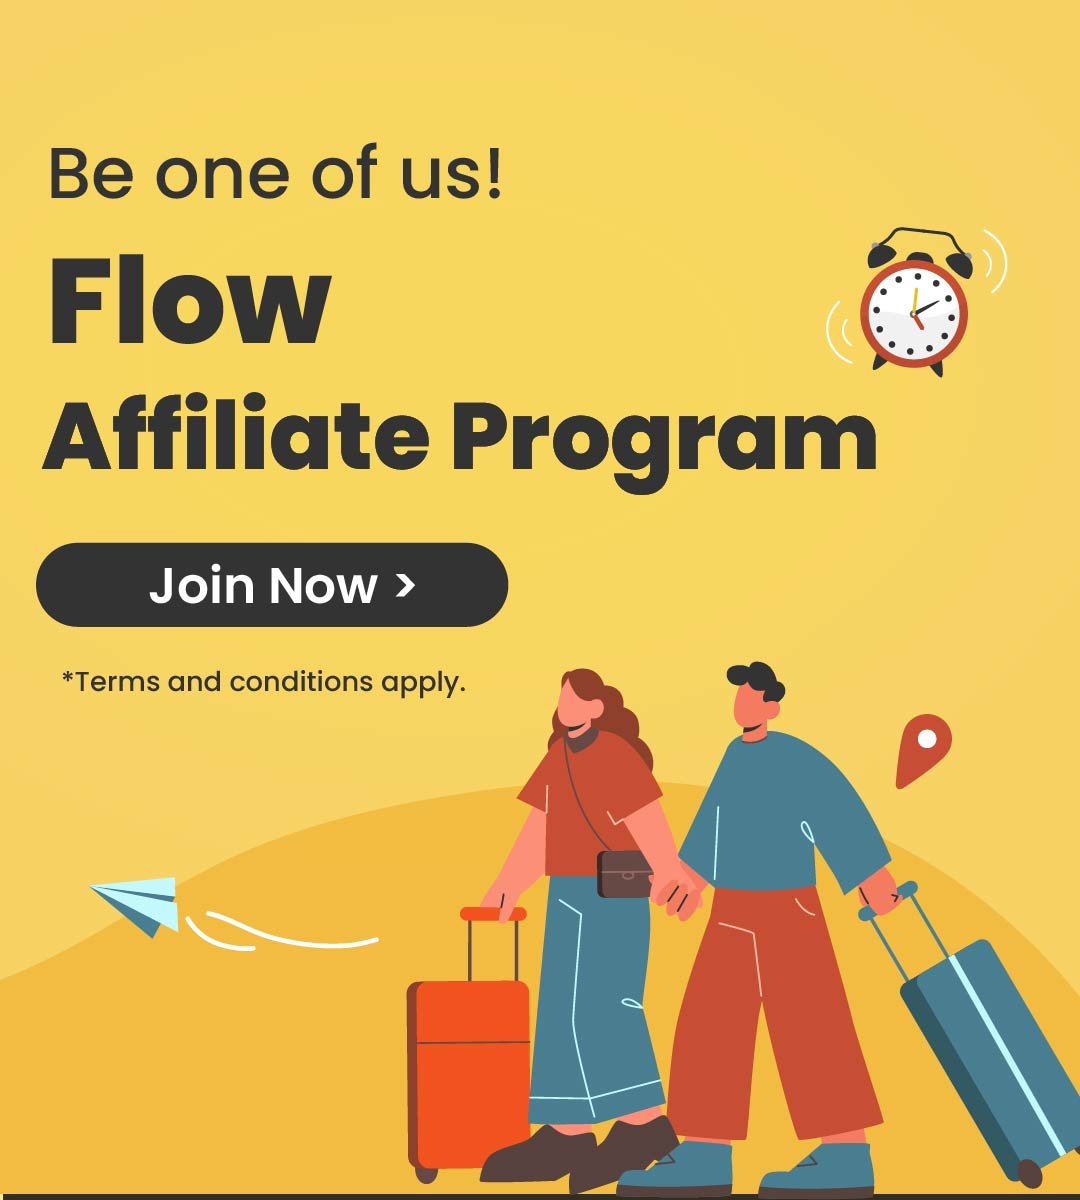 Join Flow's Affiliate Program today and earn up to 5% commission!